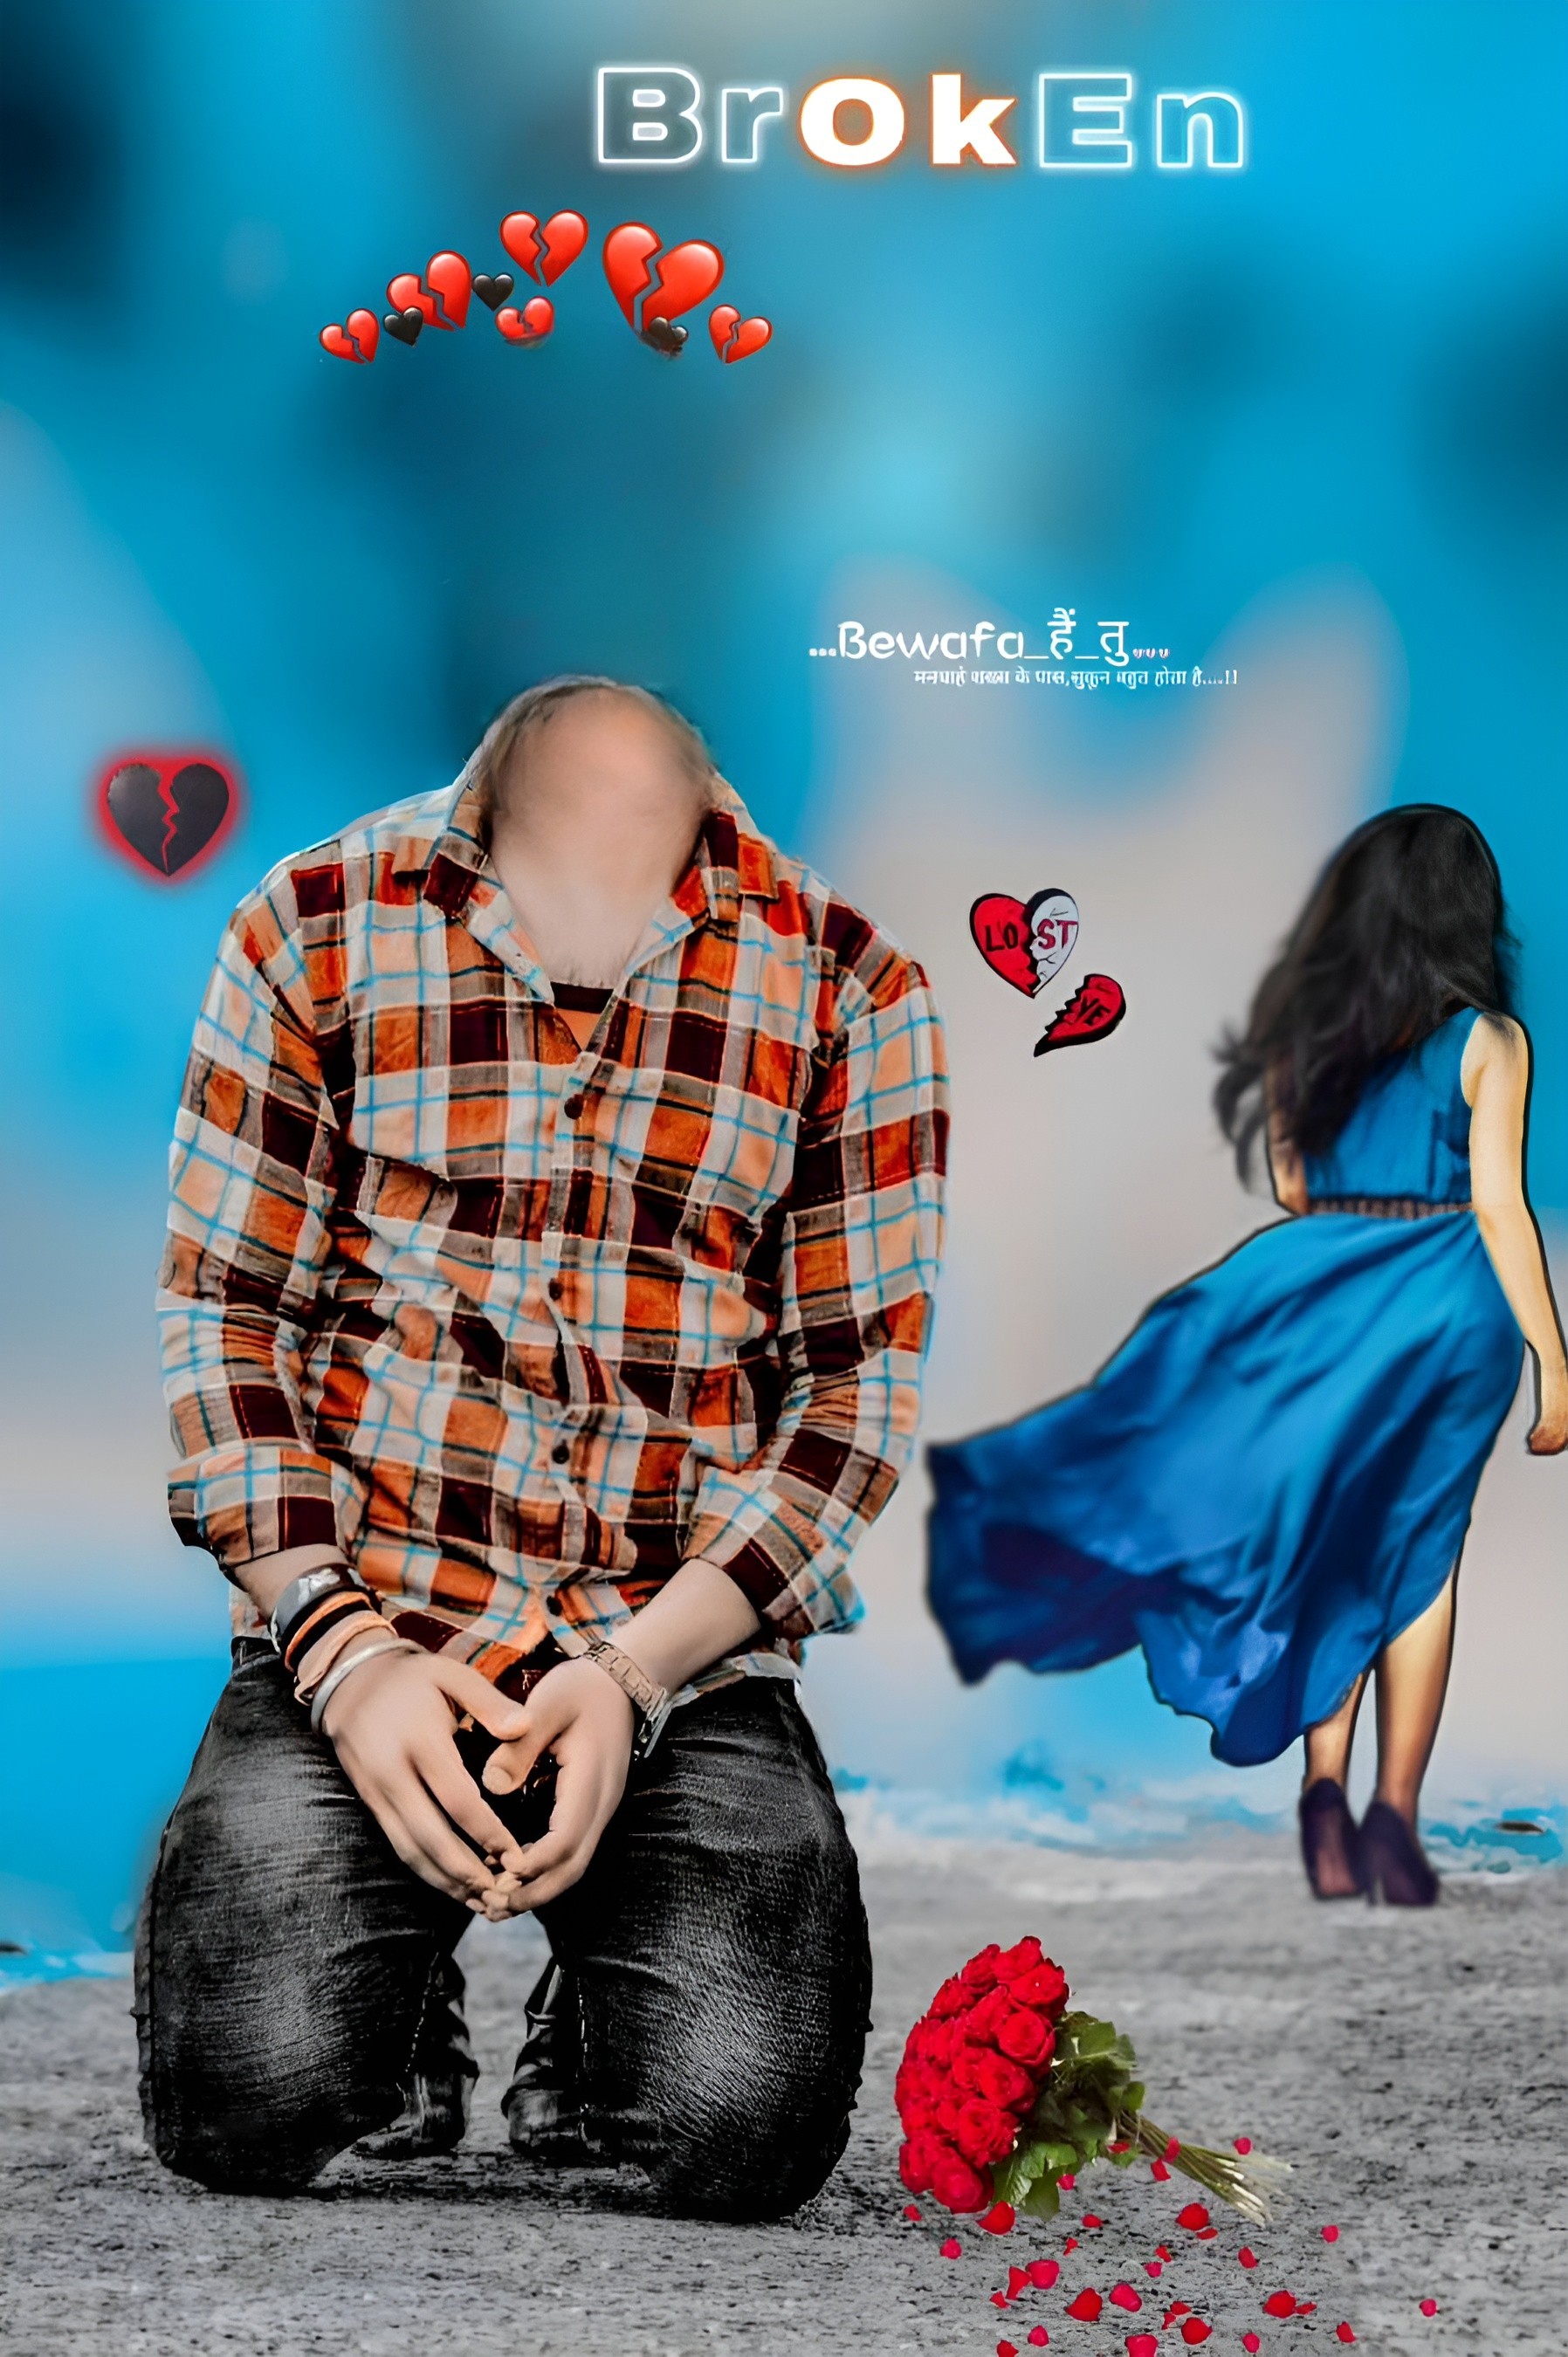 Broken Heart Without Face Boy And Girl Background Photo Editing 